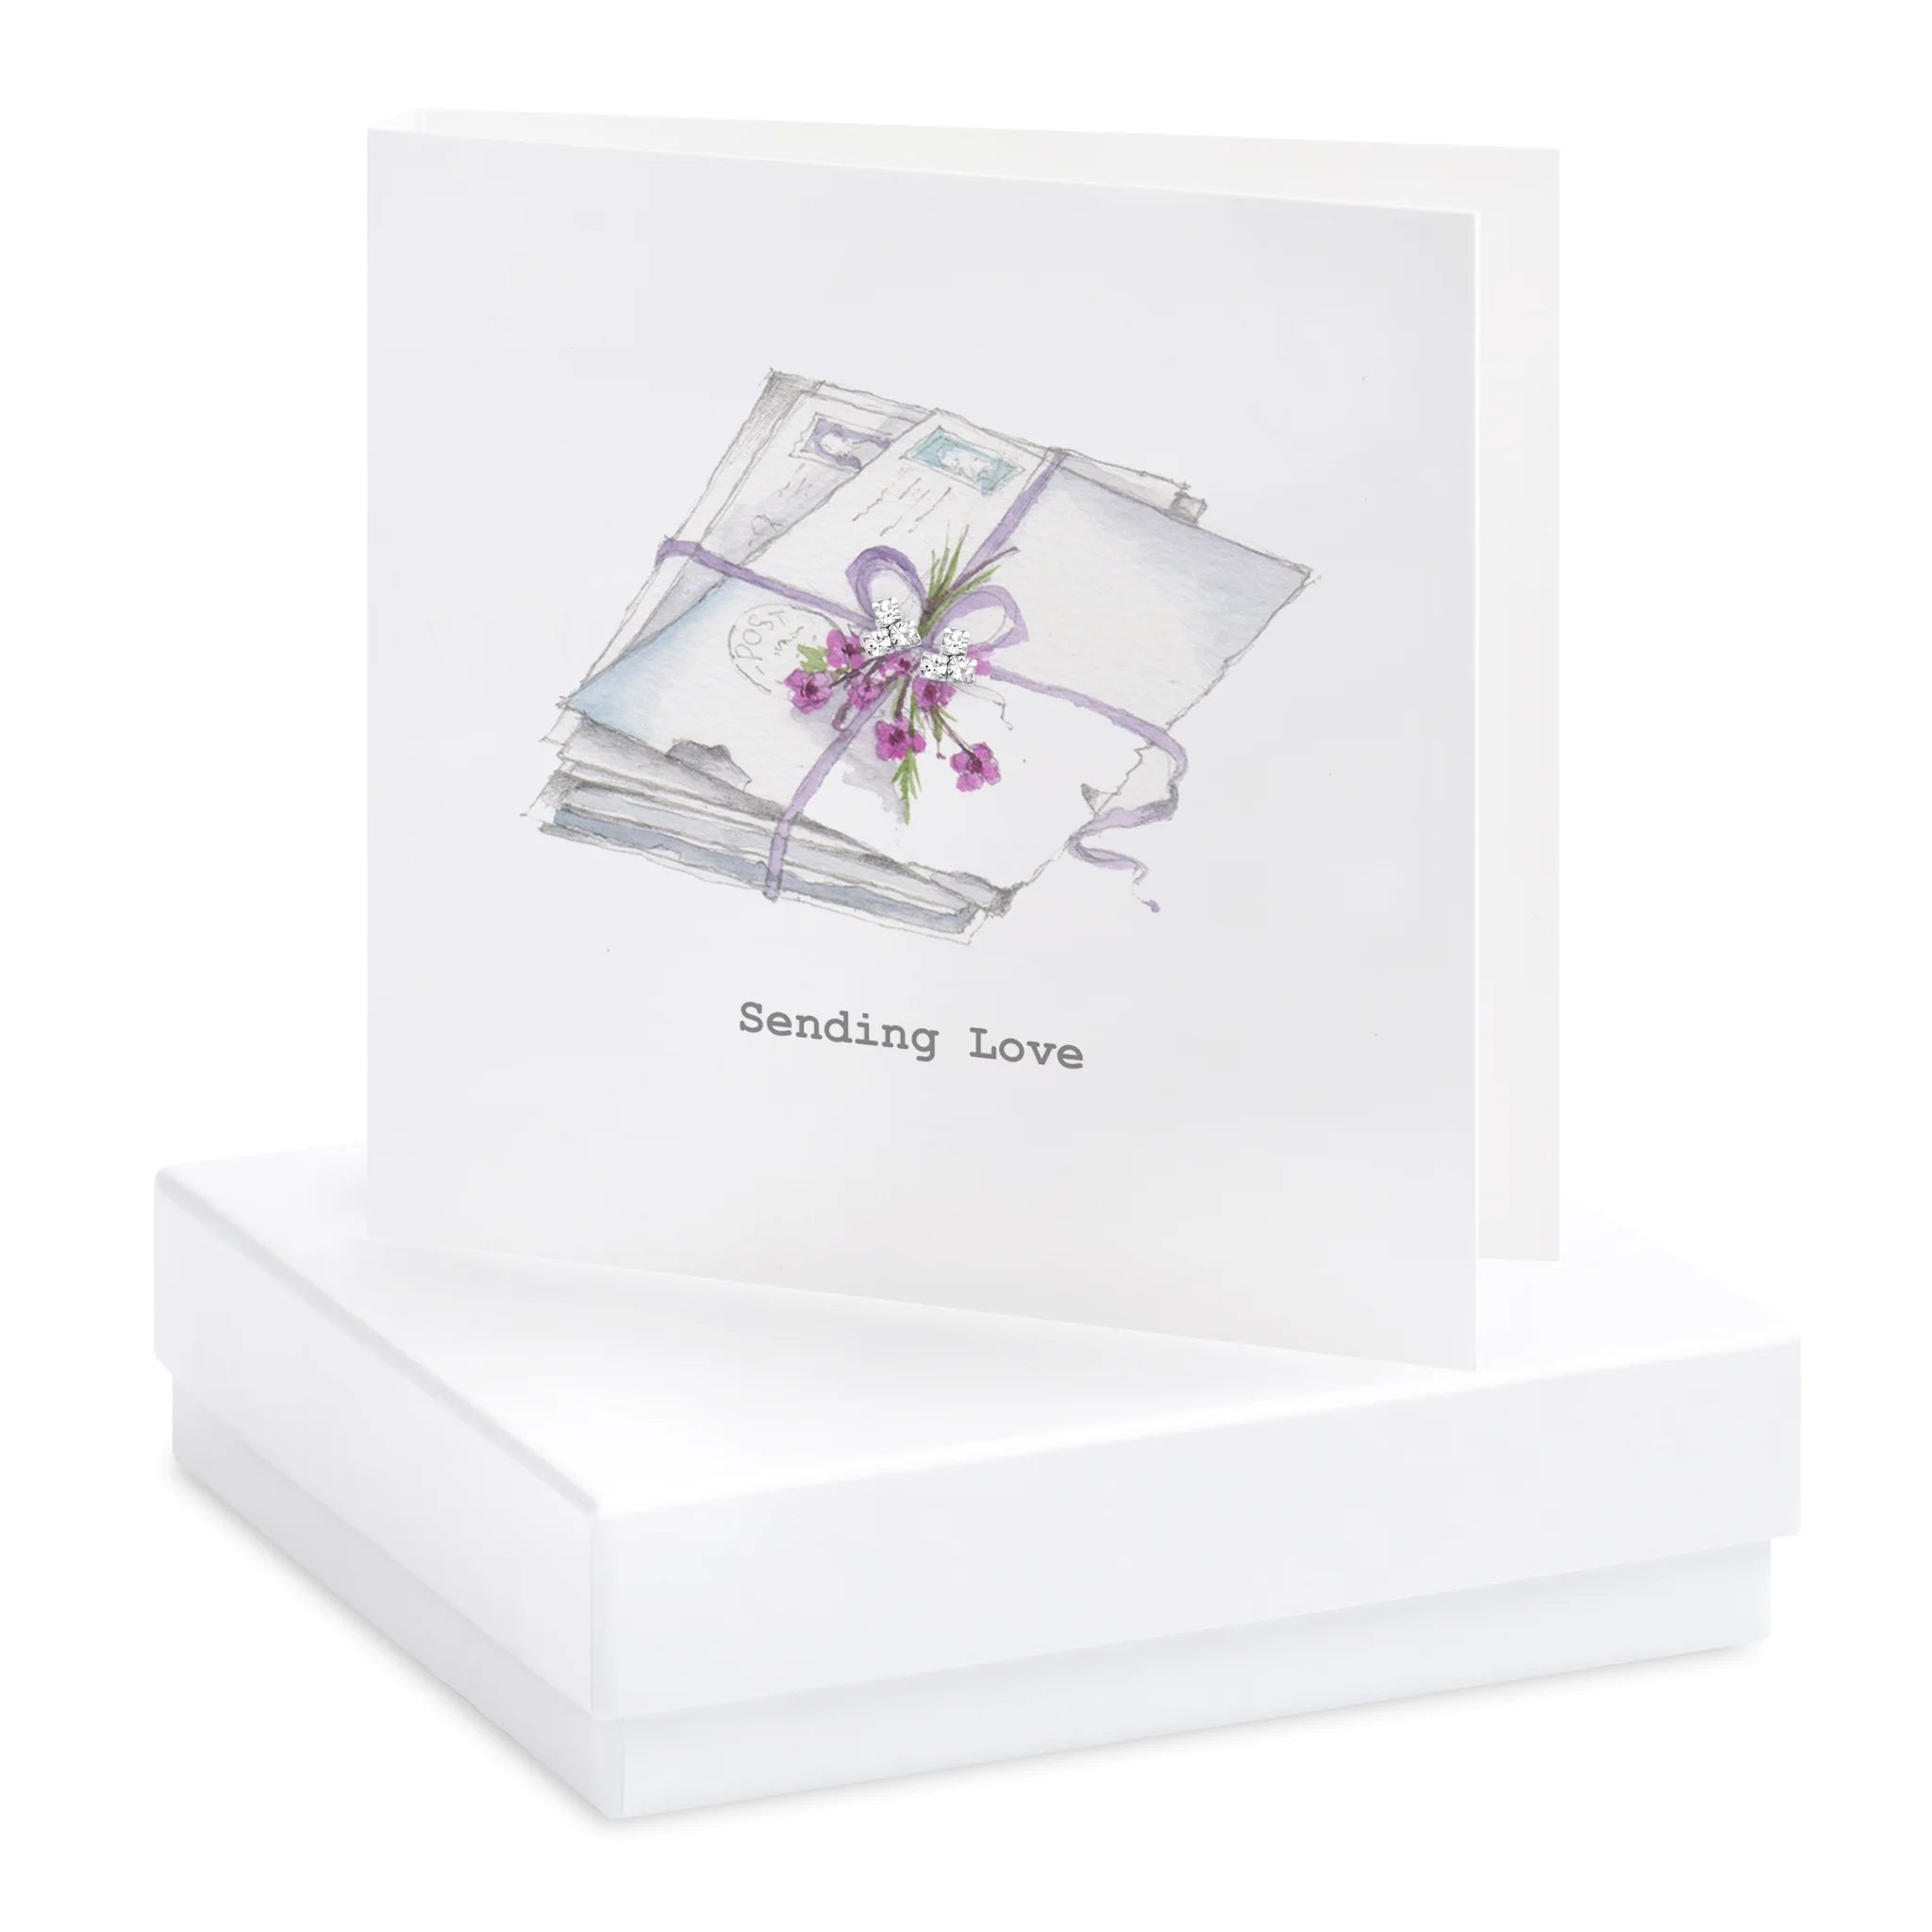 Crumble & Core | Sending Love Card with Earrings in a White Box by Weirs of Baggot Street